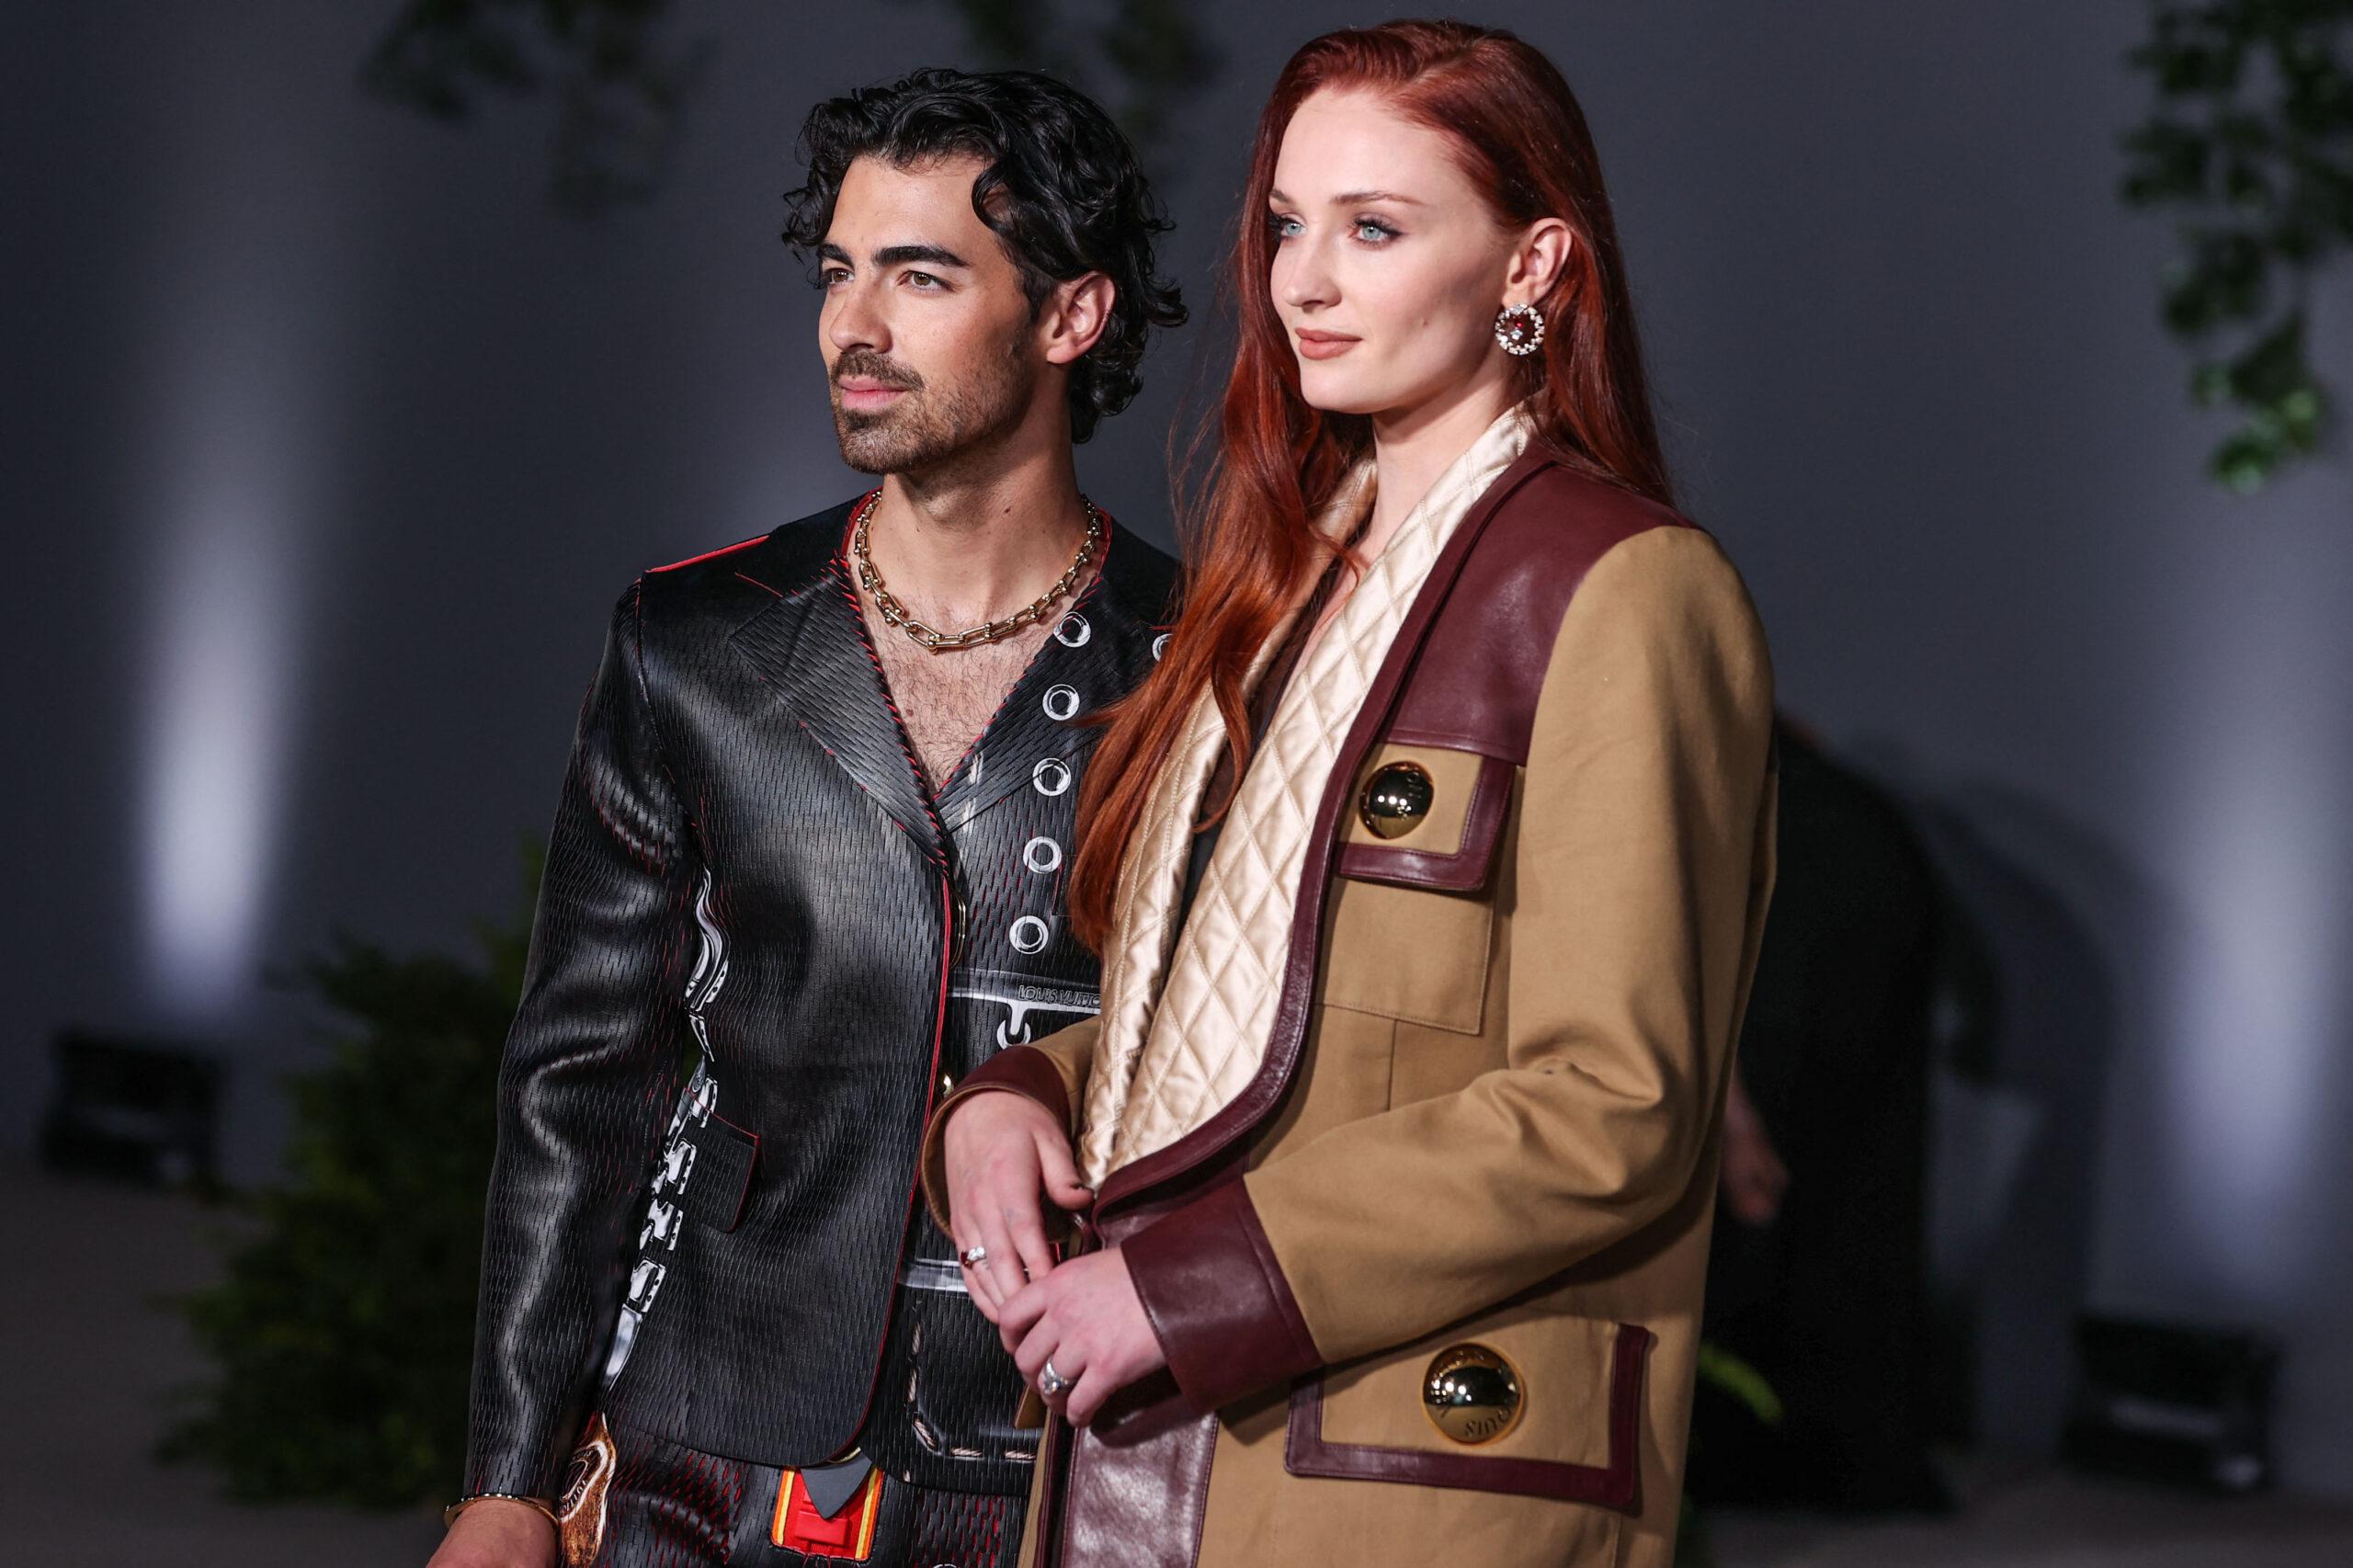 Joe Jonas and Sophie Turner at 2nd Annual Academy Museum of Motion Pictures Gala